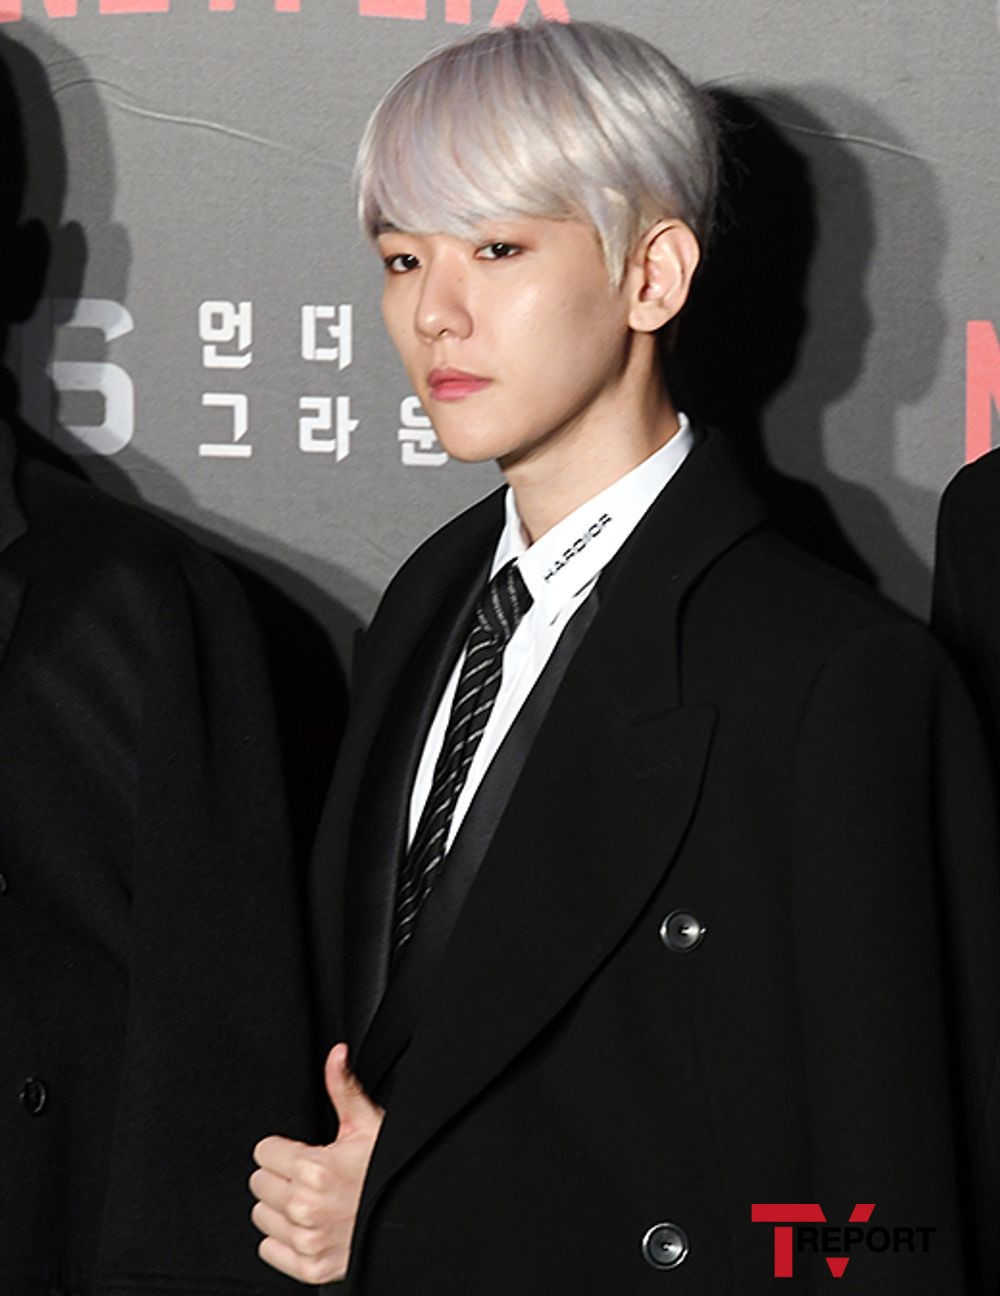 Baekhyun of the group EXO attended the film 6 Underground green carpet event held at DDP in Euljiro 3-ga, Jung-gu, Seoul on the afternoon of the 2nd.The movie 6 Underground will be released on Netflix on the 13th as an action blockbuster featuring six elite agents who erased all past records as if they did not exist in the first place, and the biggest operation on the ground that they have become Ghost themselves.